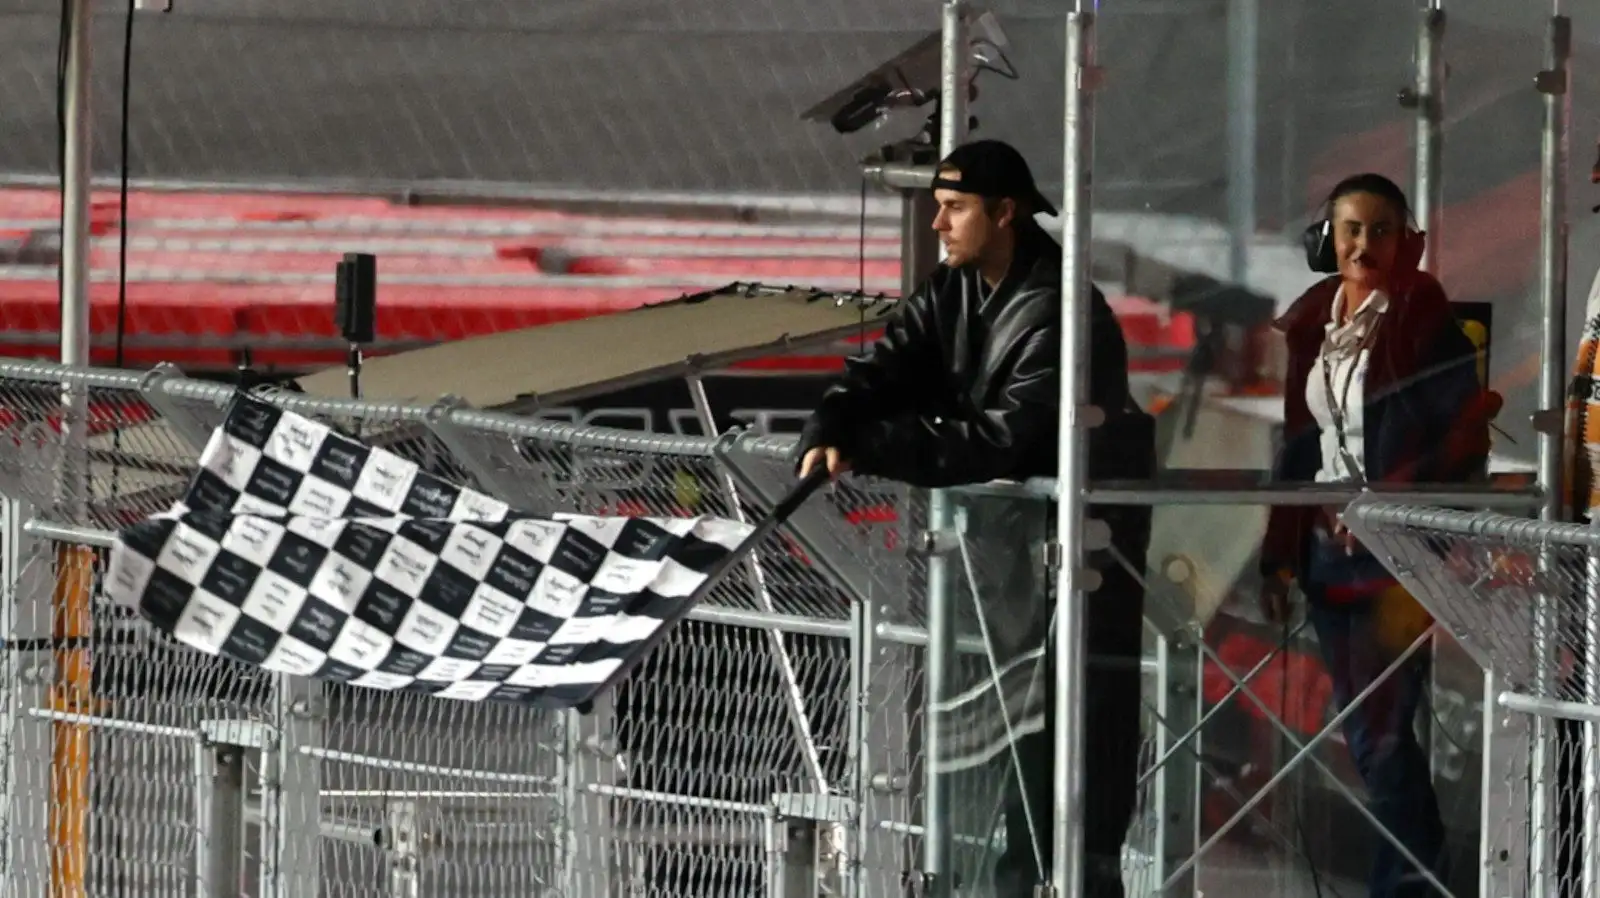 Singer Justin Bieber waves the chequered flag at the end of the race.